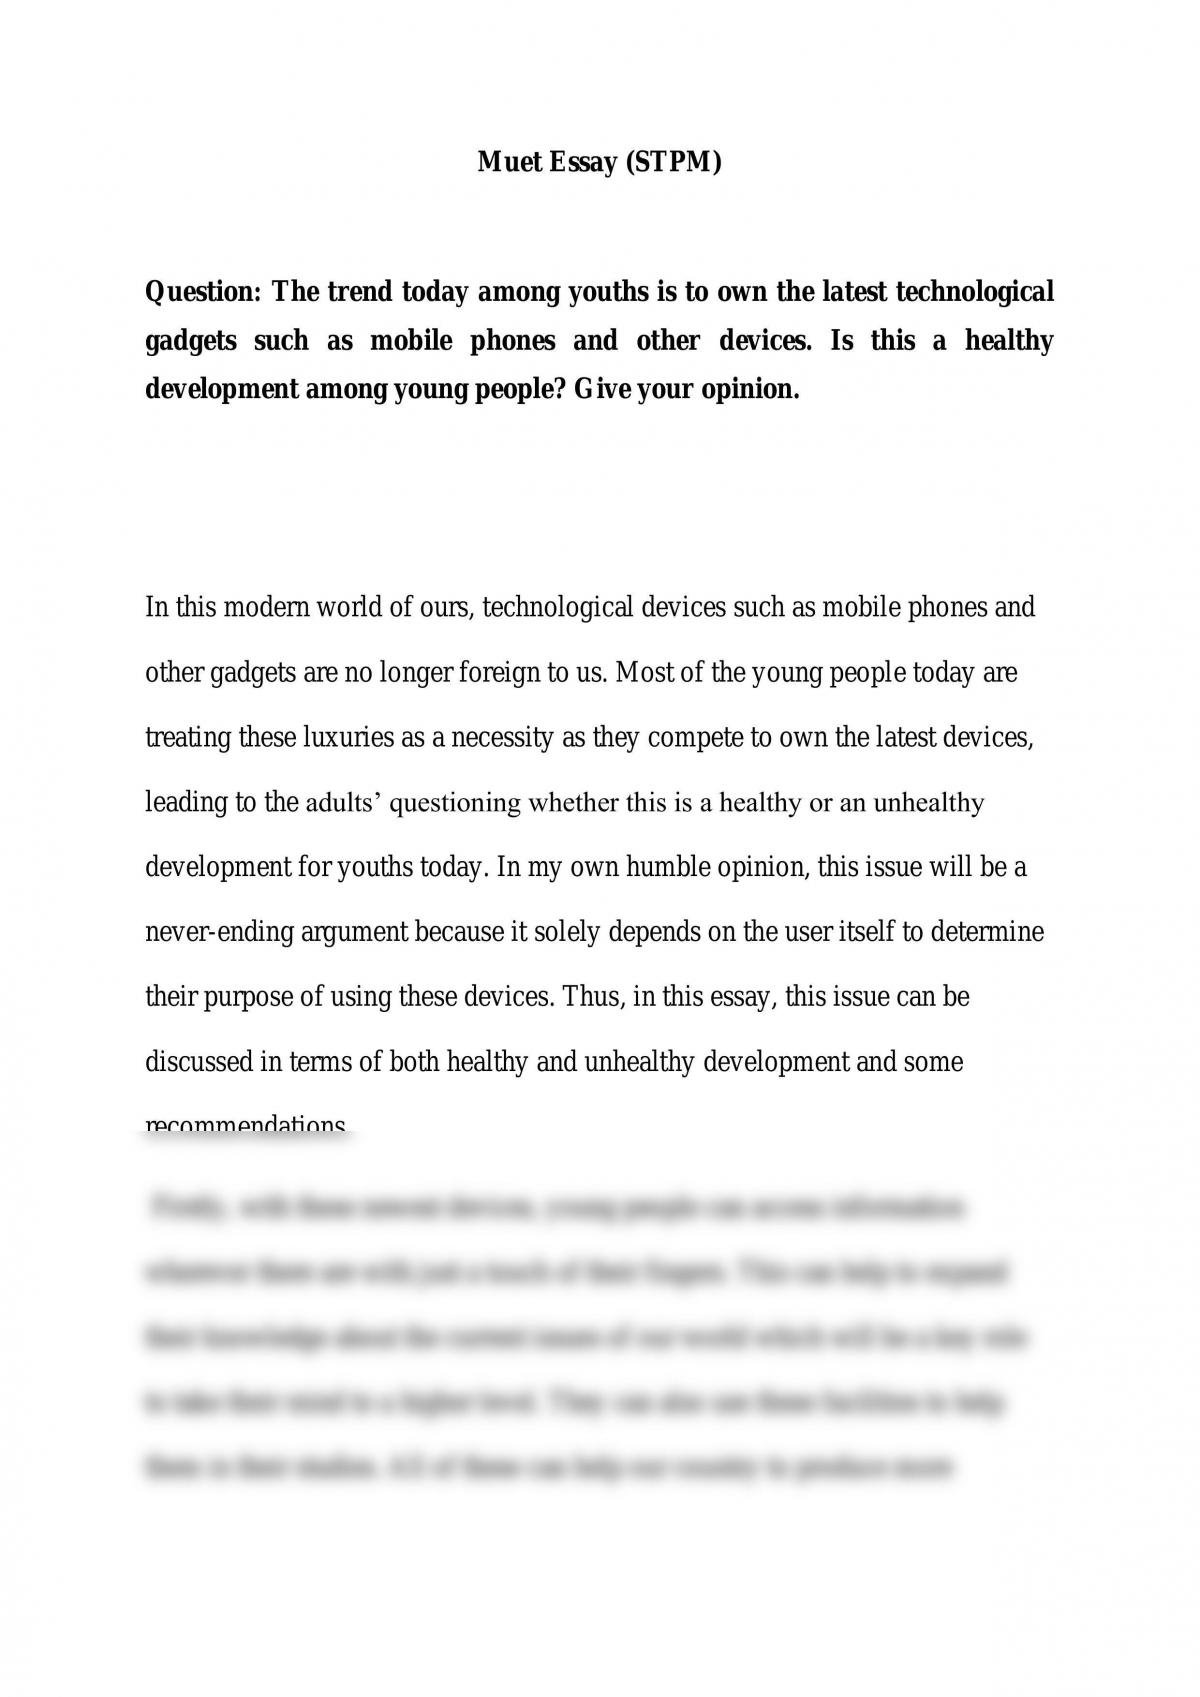 sample essay for muet writing question 2